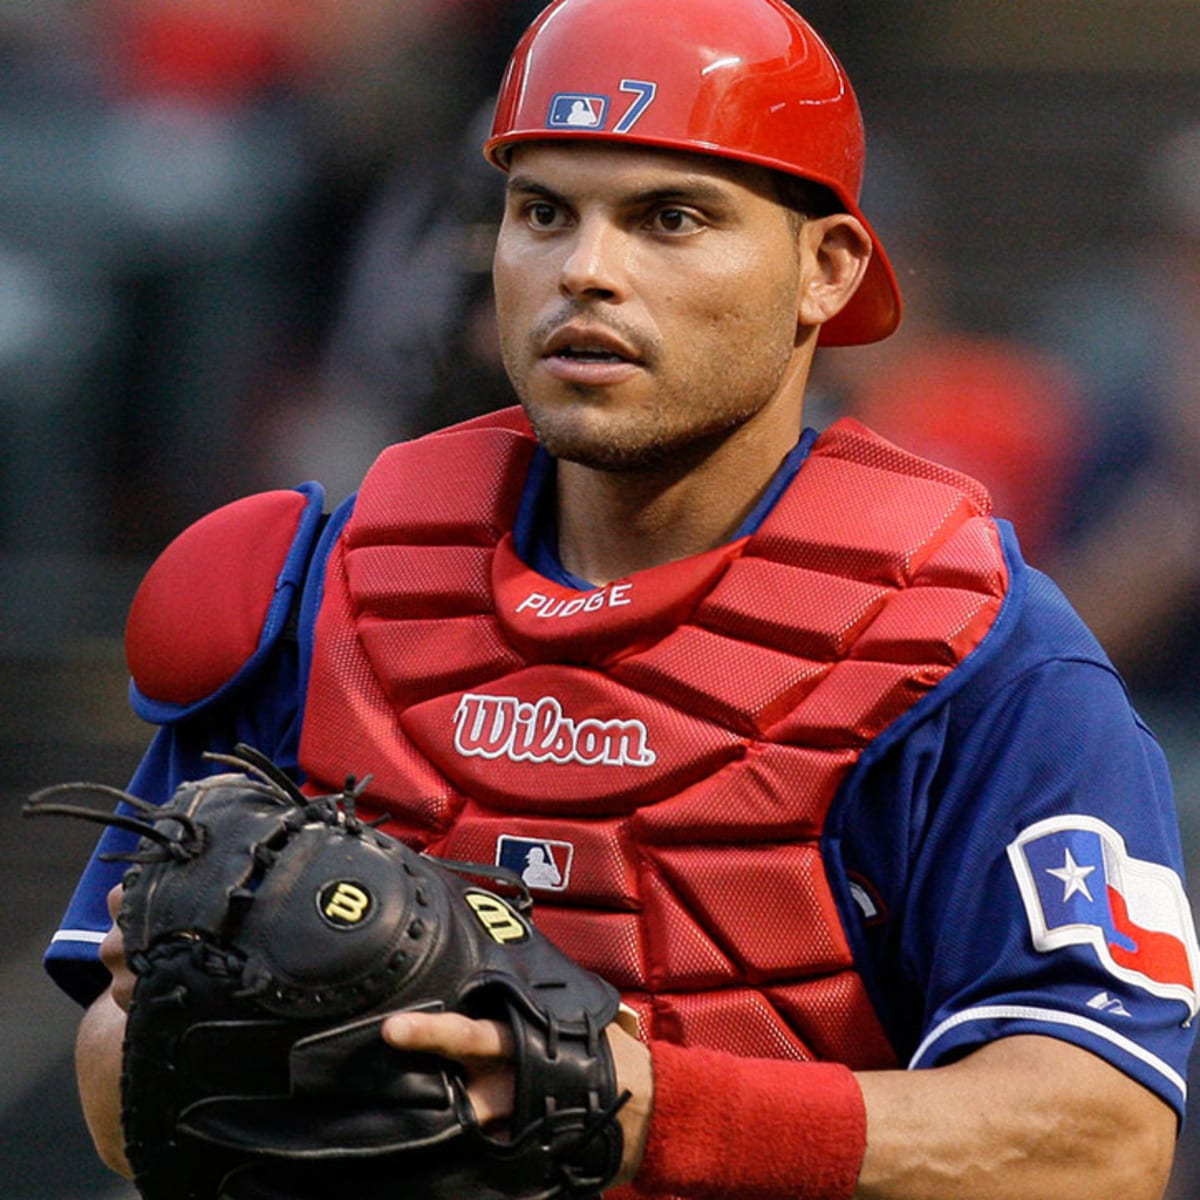 One of us: Pudge Rodriguez is in the Hall of Fame